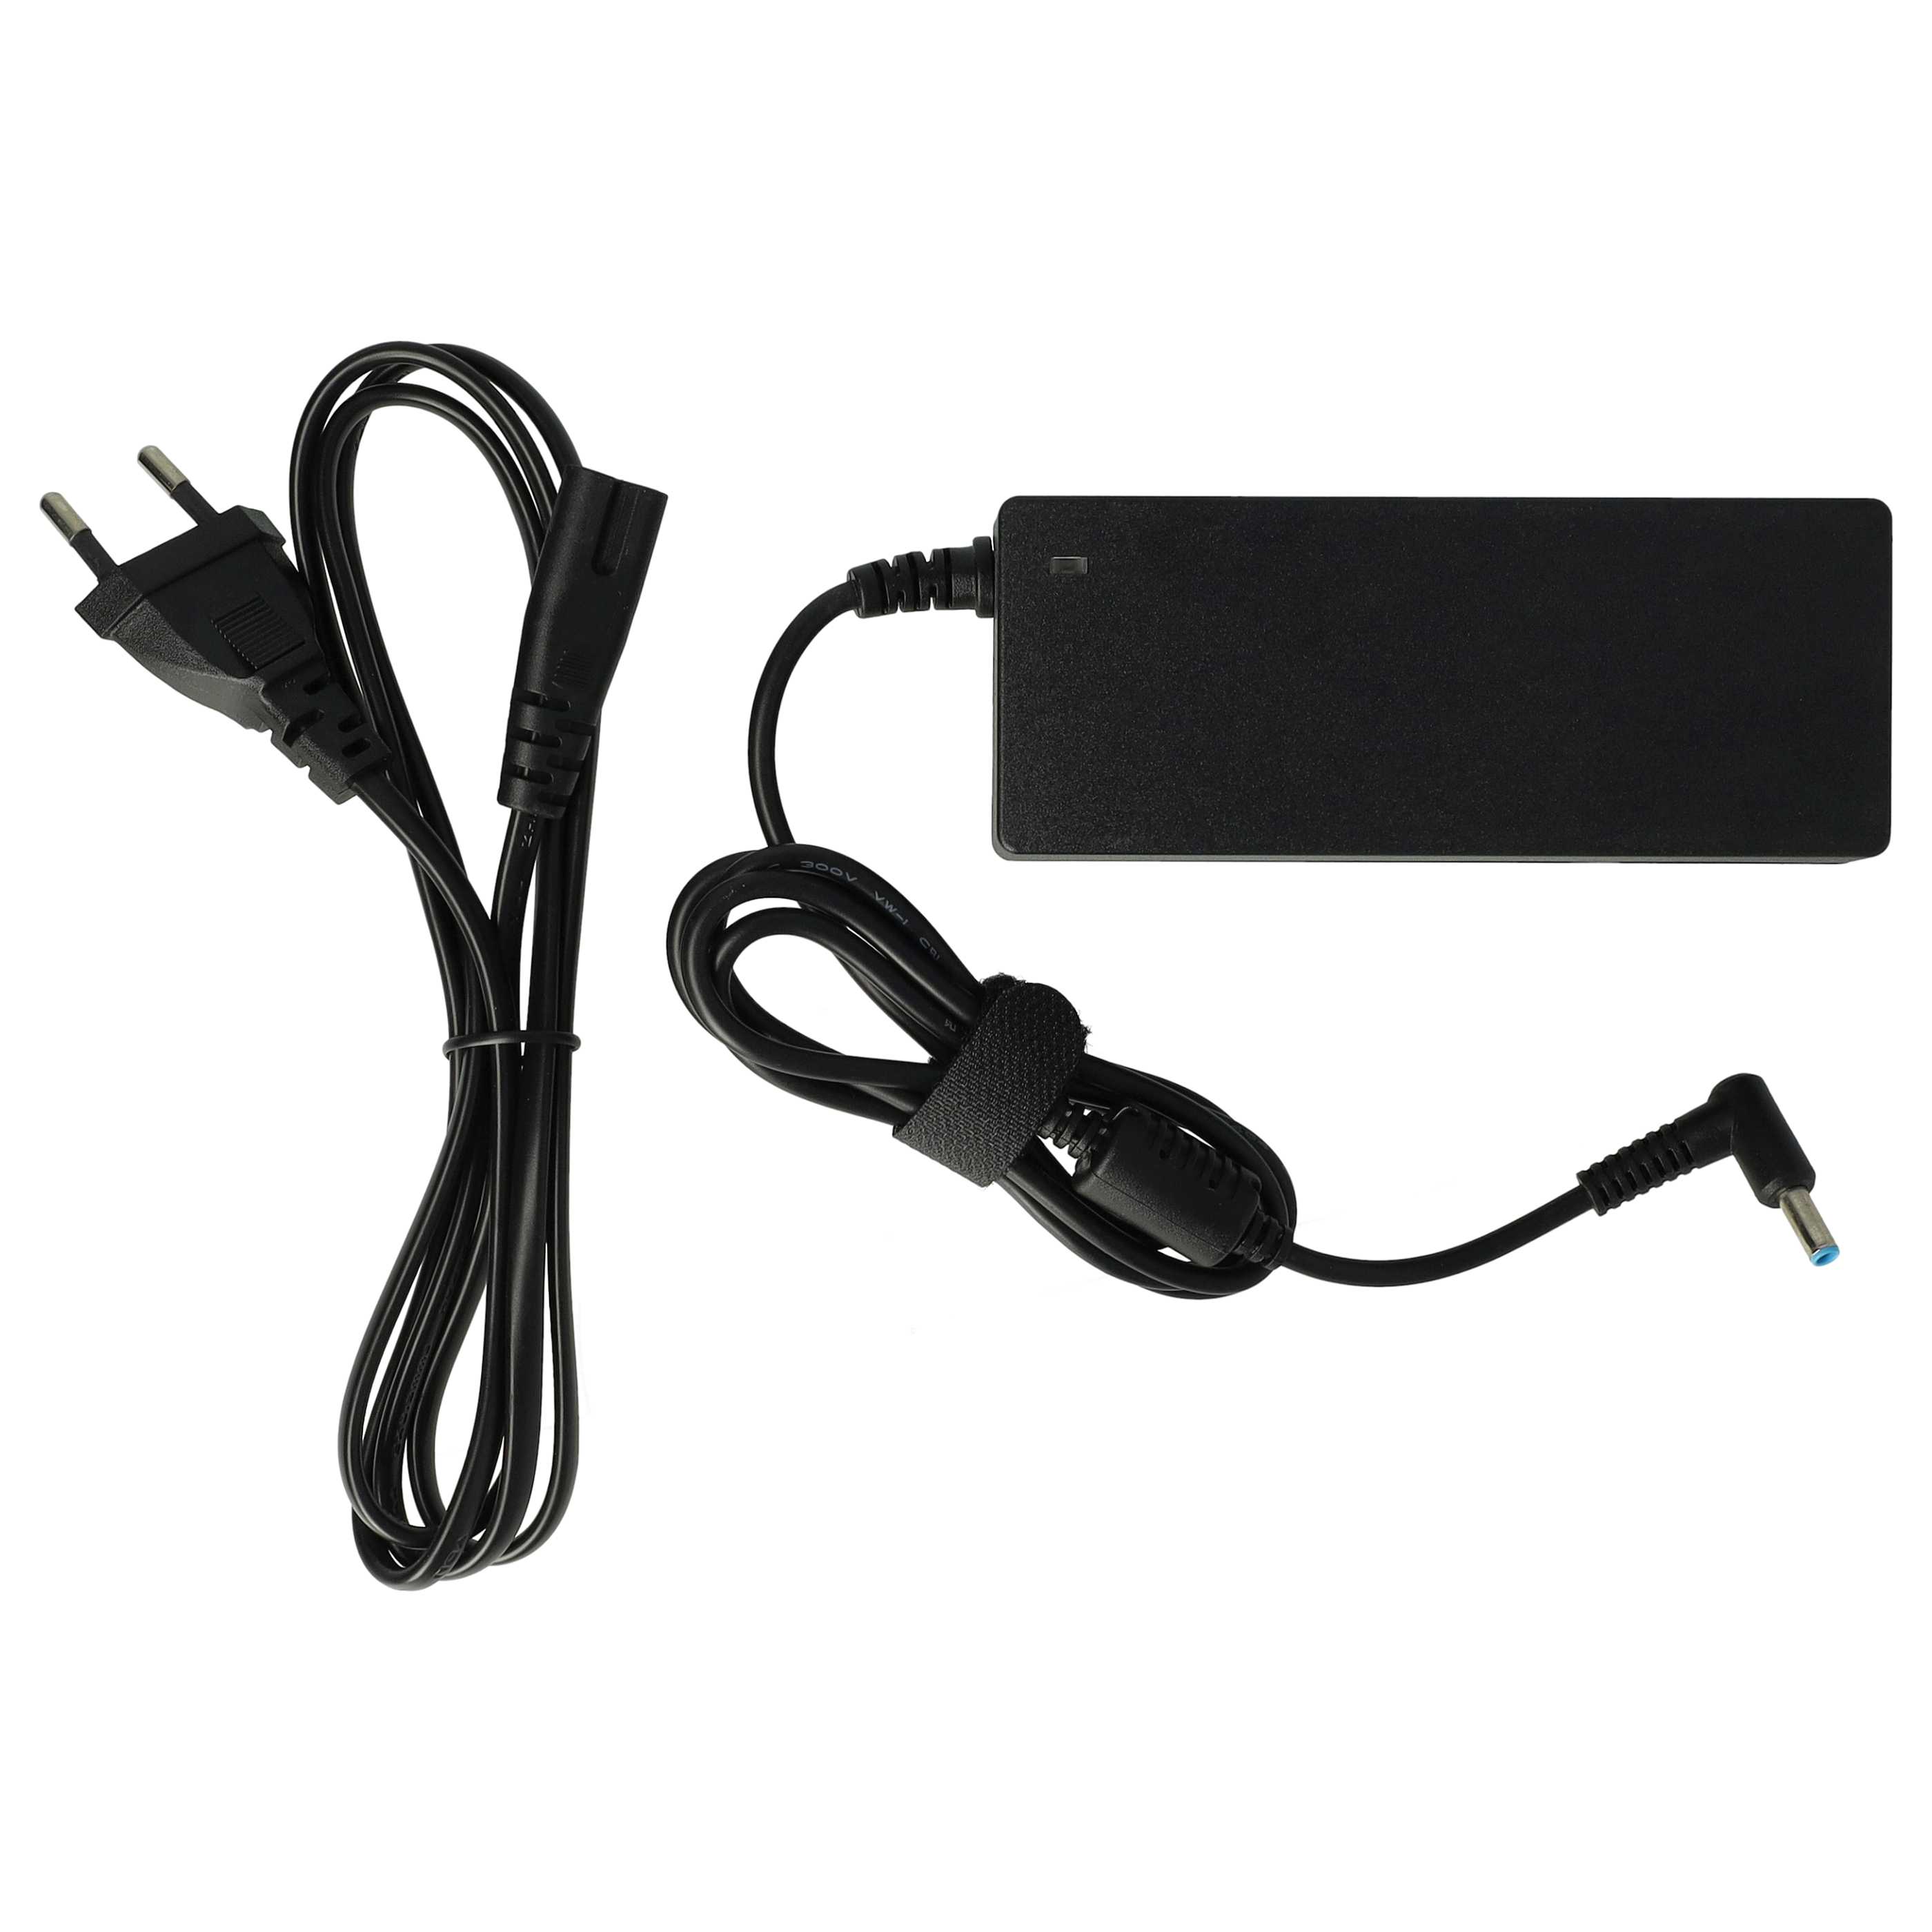 Mains Power Adapter replaces HP 677777-004, 463553-004, 609940-001, 463955-001 for HPNotebook, 90 W